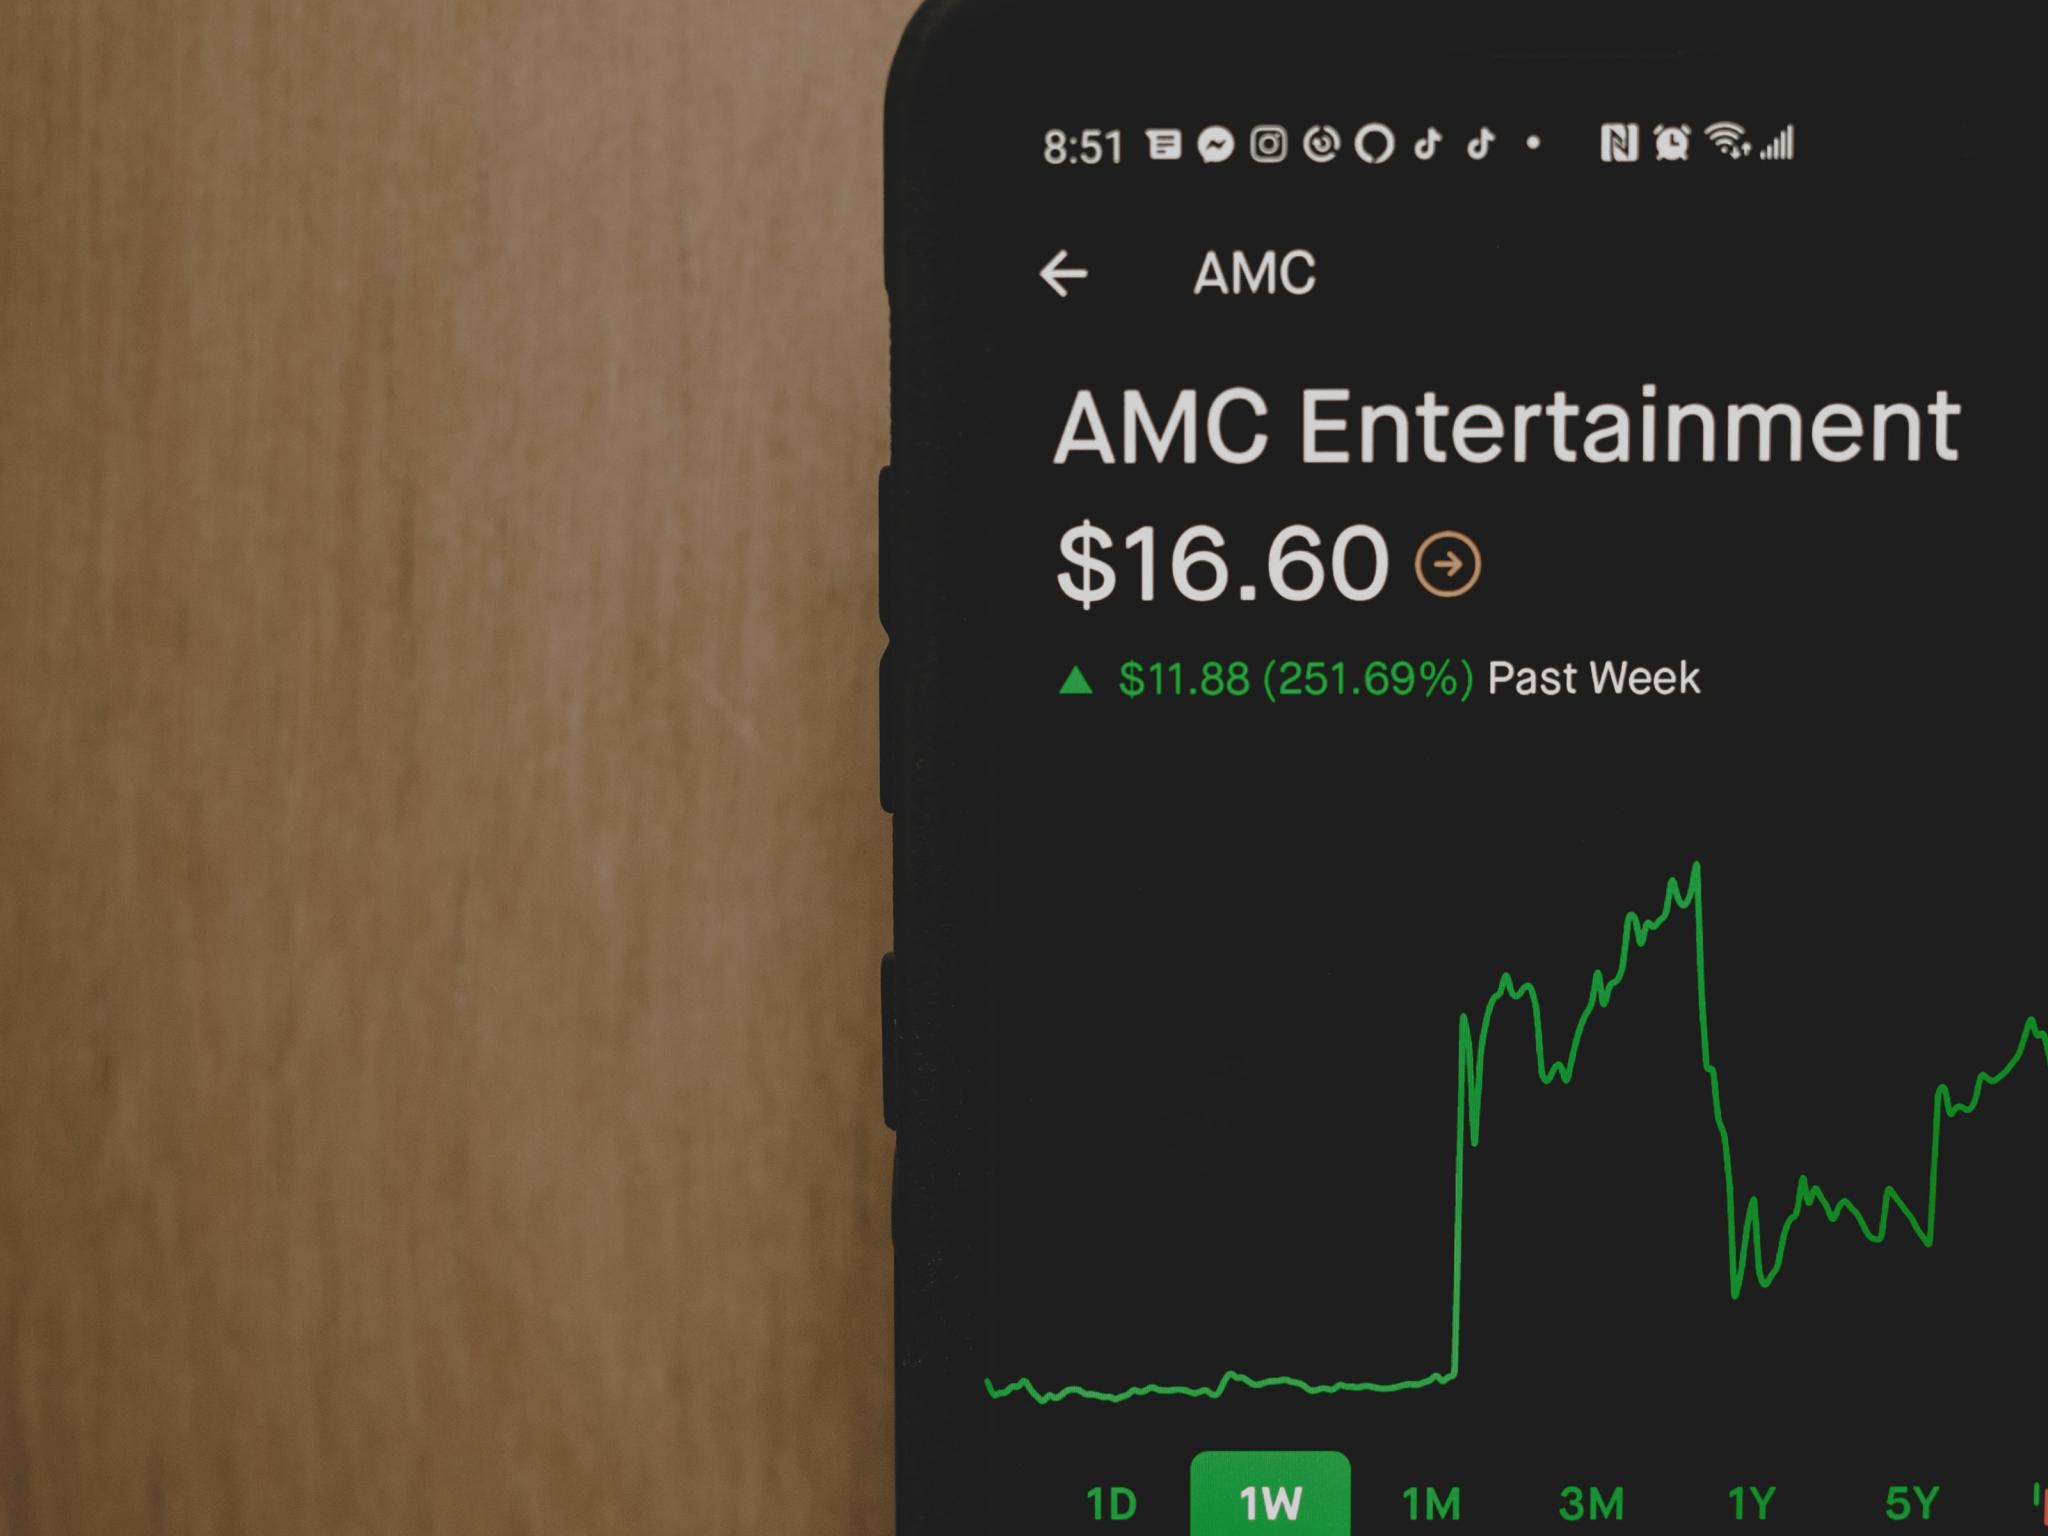  amc-entertainment-tops-q2-trends-for-millenials-and-gen-z-wish-enters-the-top-100 